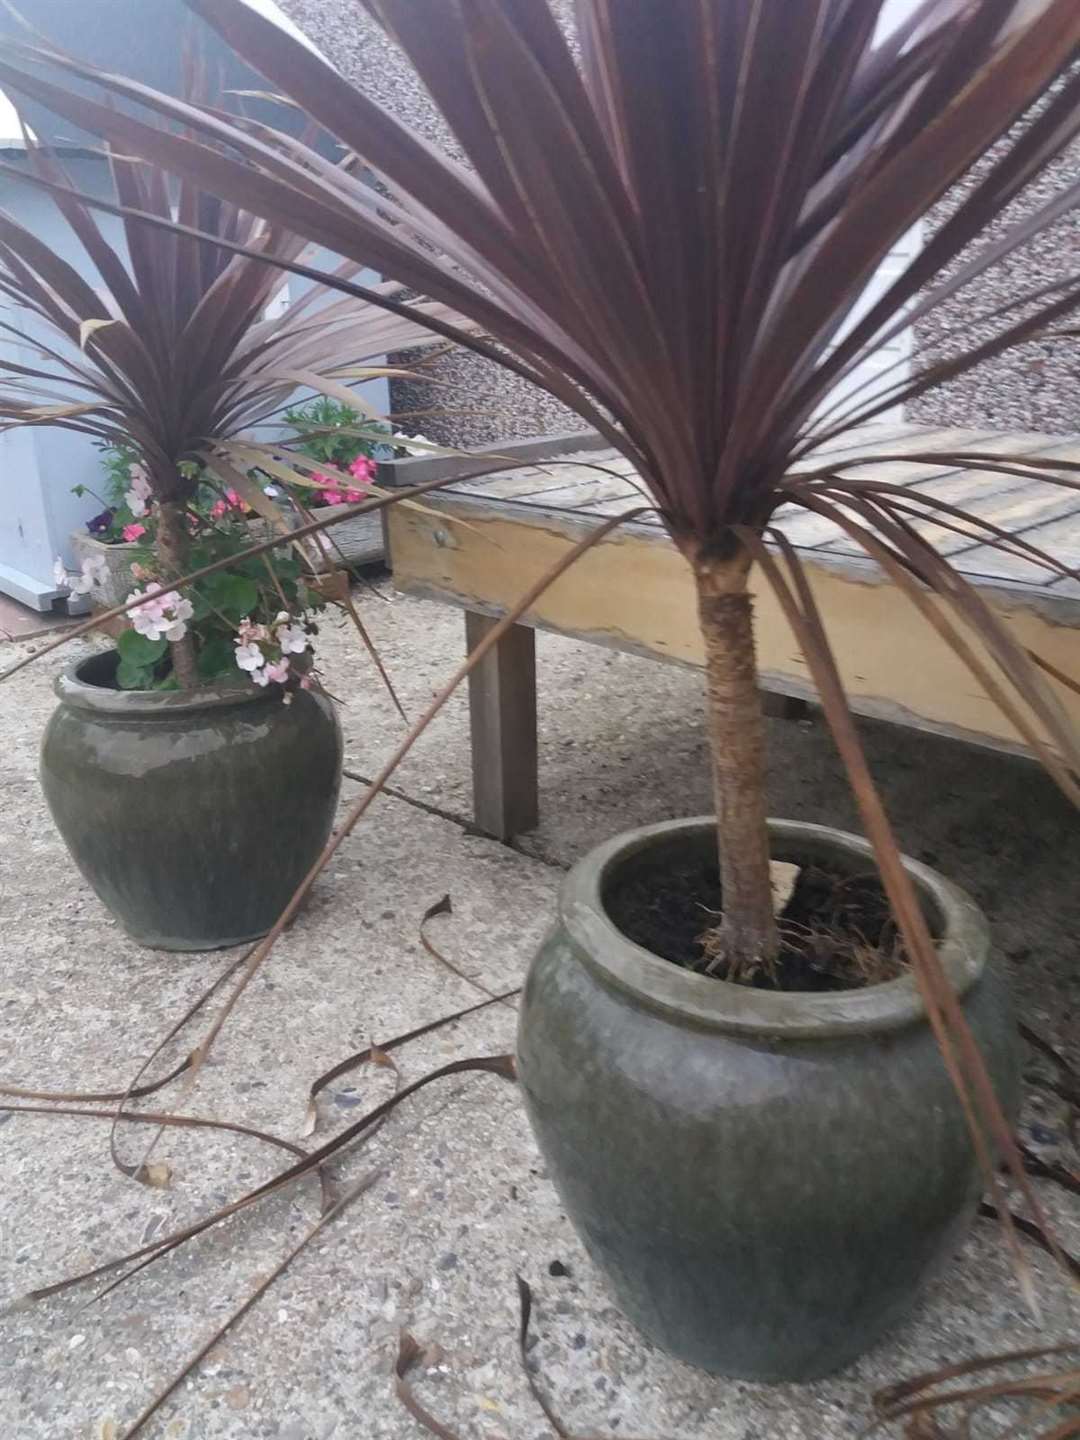 The stolen cordylines (pictured) were returned by a masked man last Thursday evening